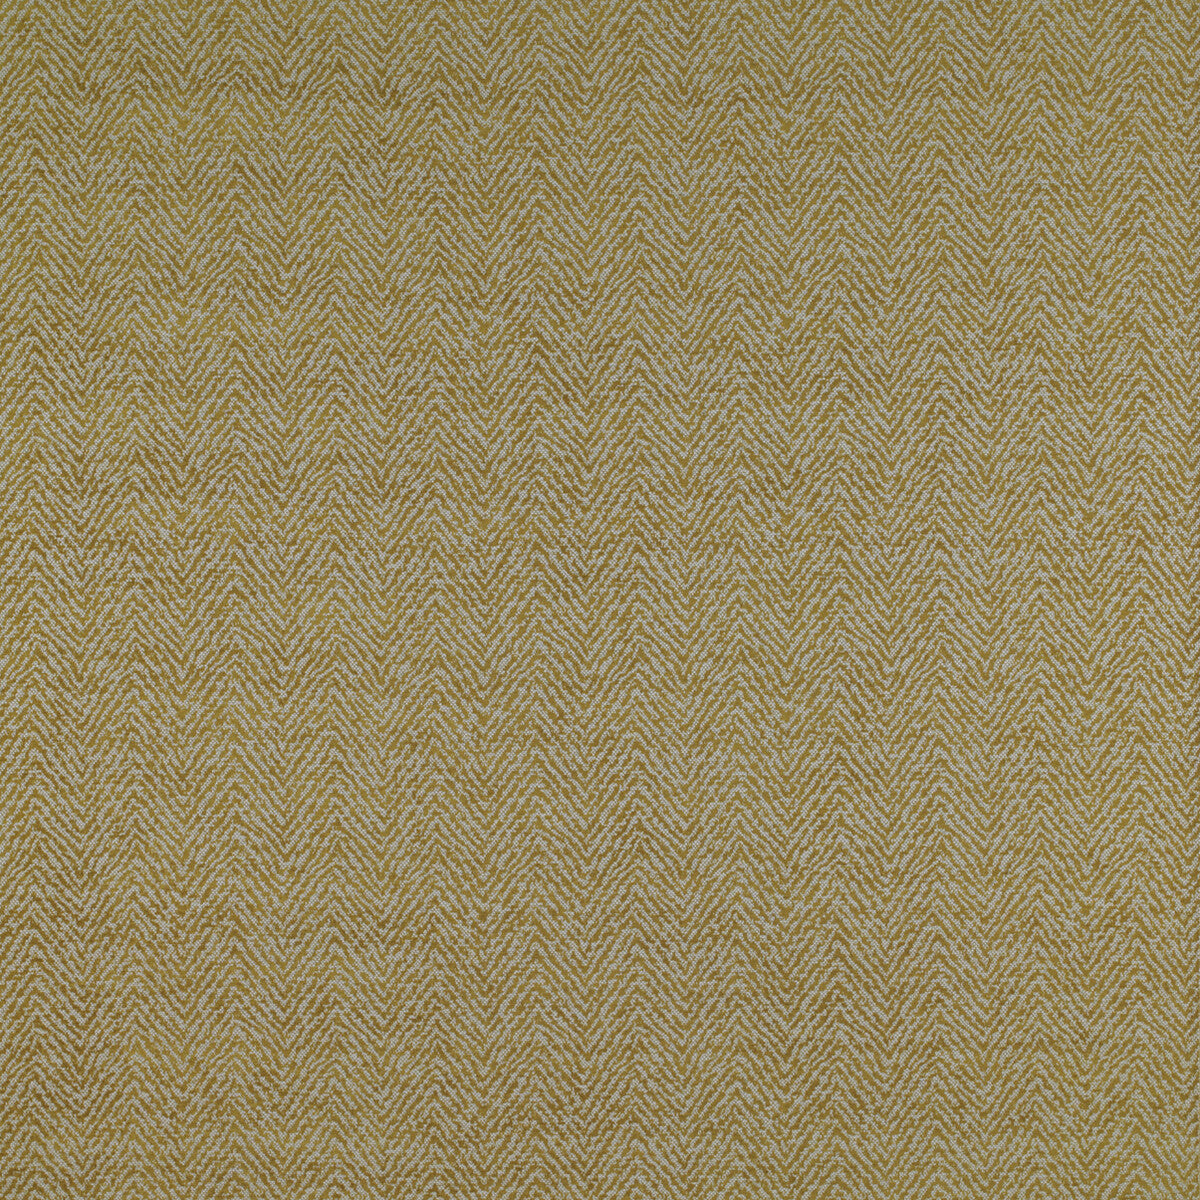 Santa Ana fabric in lima color - pattern GDT5206.001.0 - by Gaston y Daniela in the Madrid collection